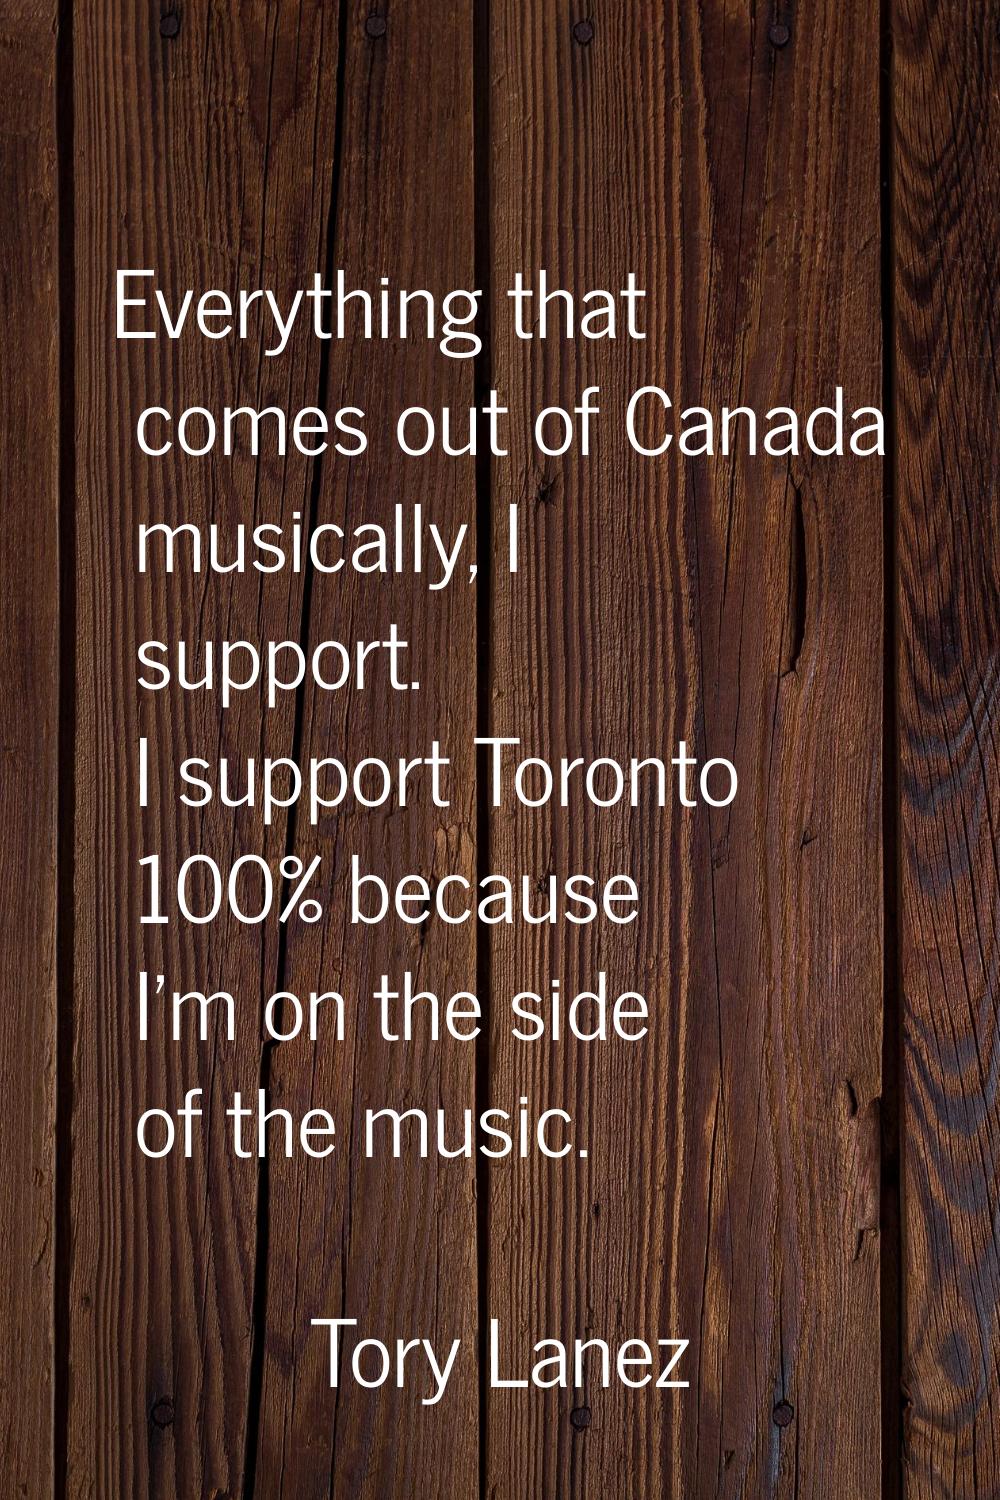 Everything that comes out of Canada musically, I support. I support Toronto 100% because I'm on the